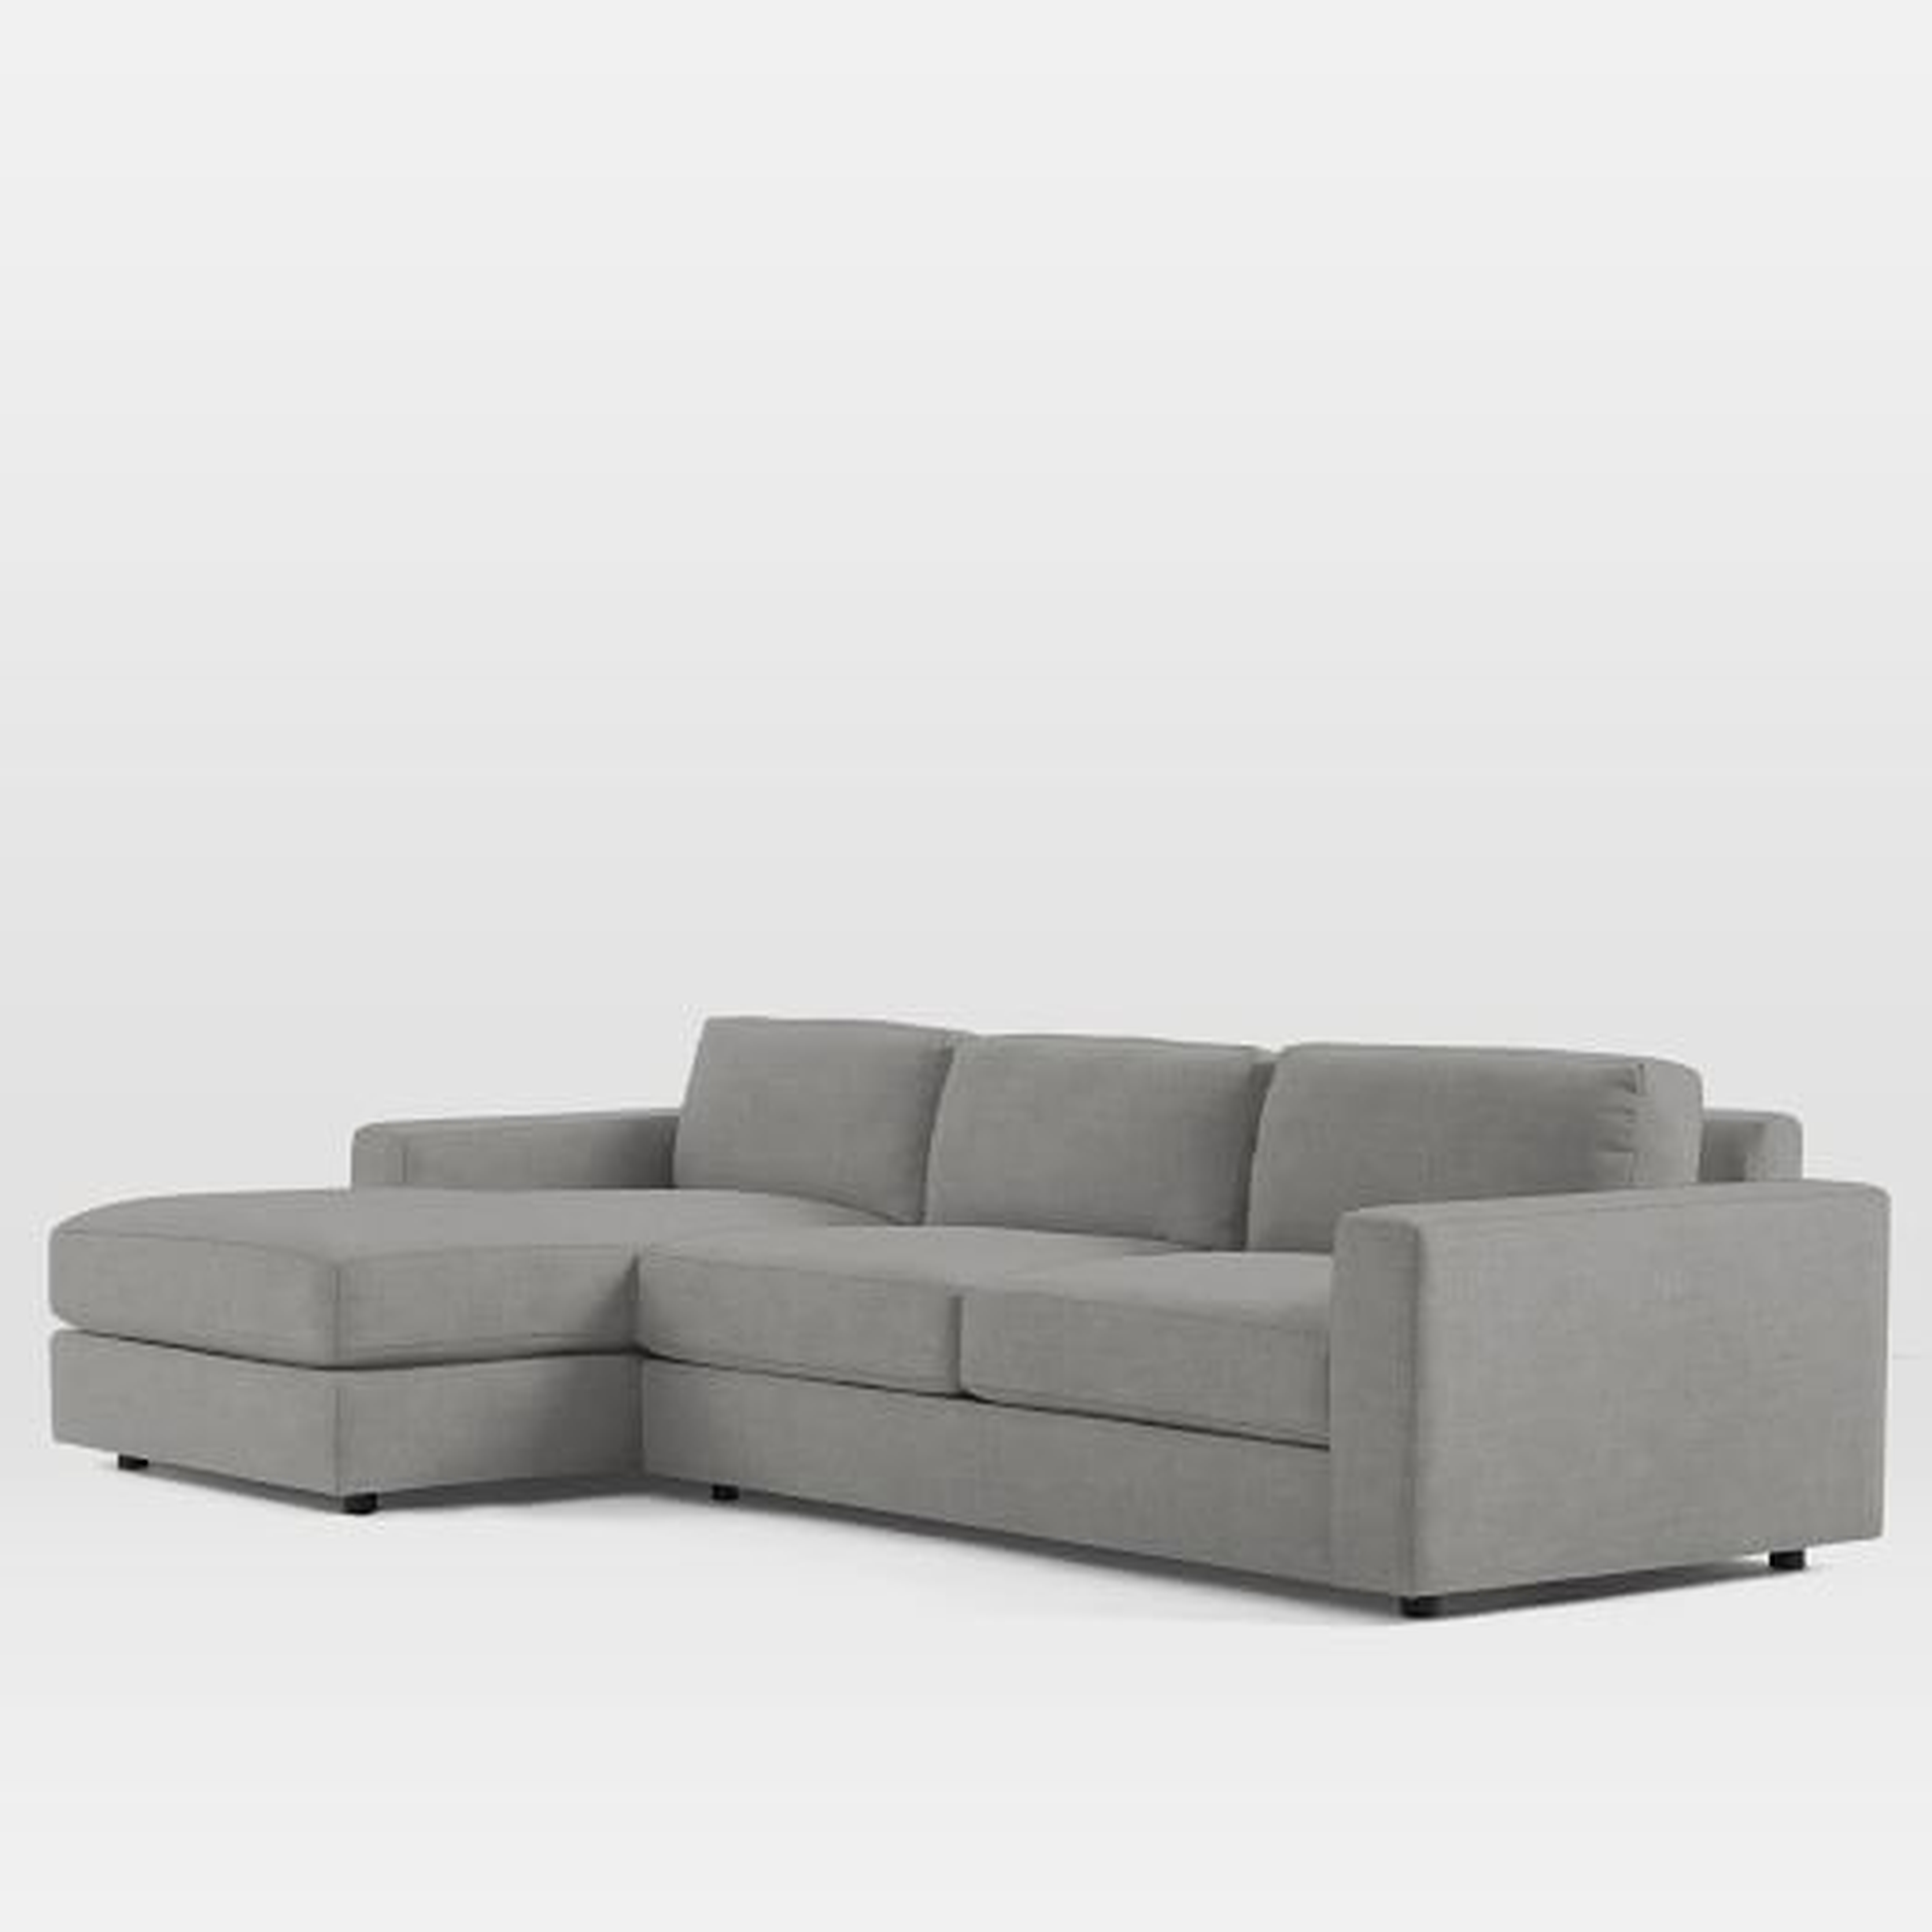 Urban 2-Piece Chaise Sectional, Left Chaise 2-Piece Sectional - Large, Standard (39") - Down Blend Fill - West Elm